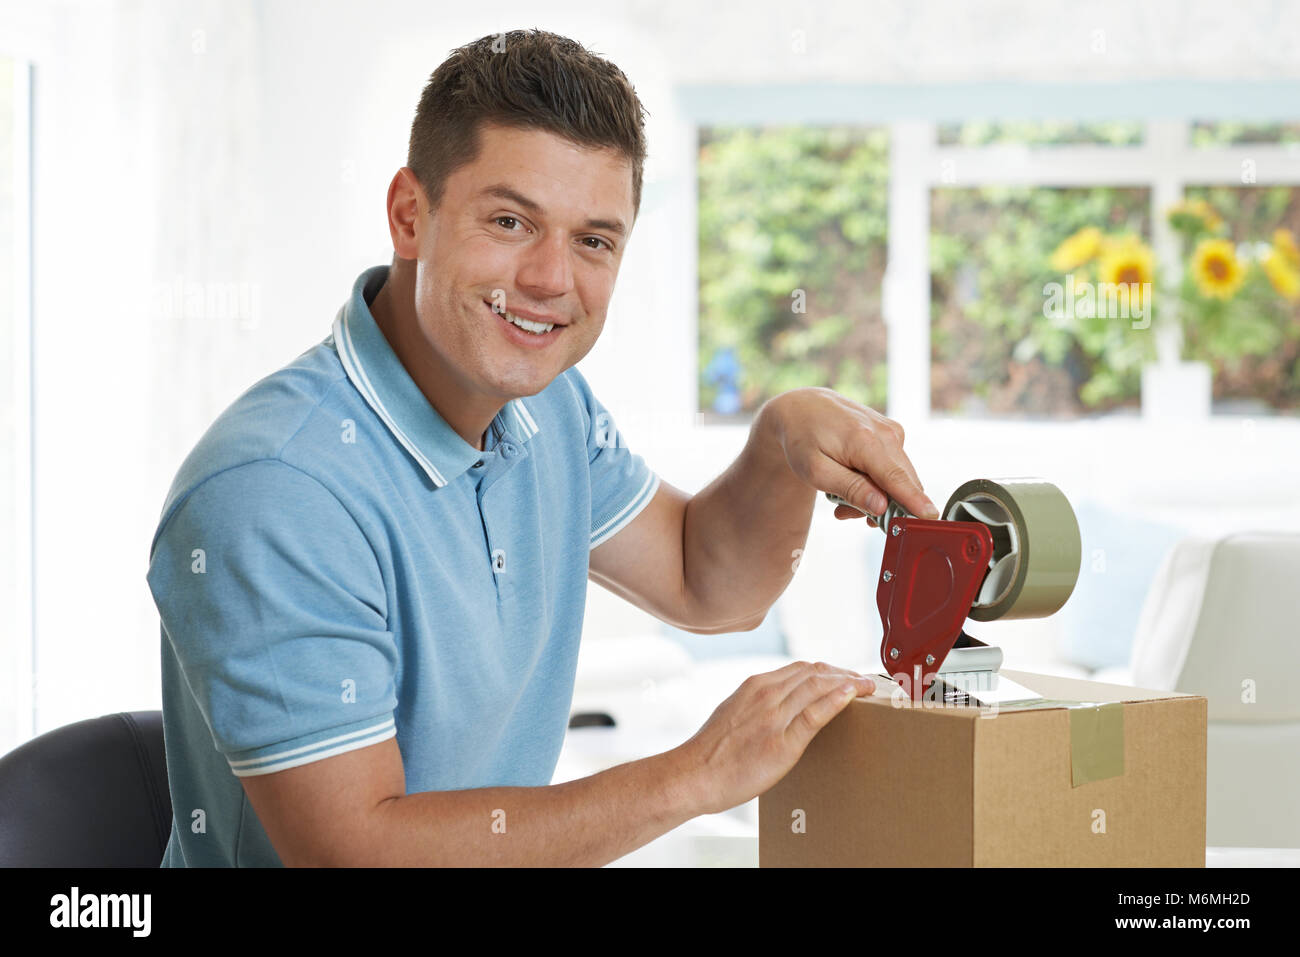 Portrait Of Man At Home Sealing Box For Dispatch Stock Photo